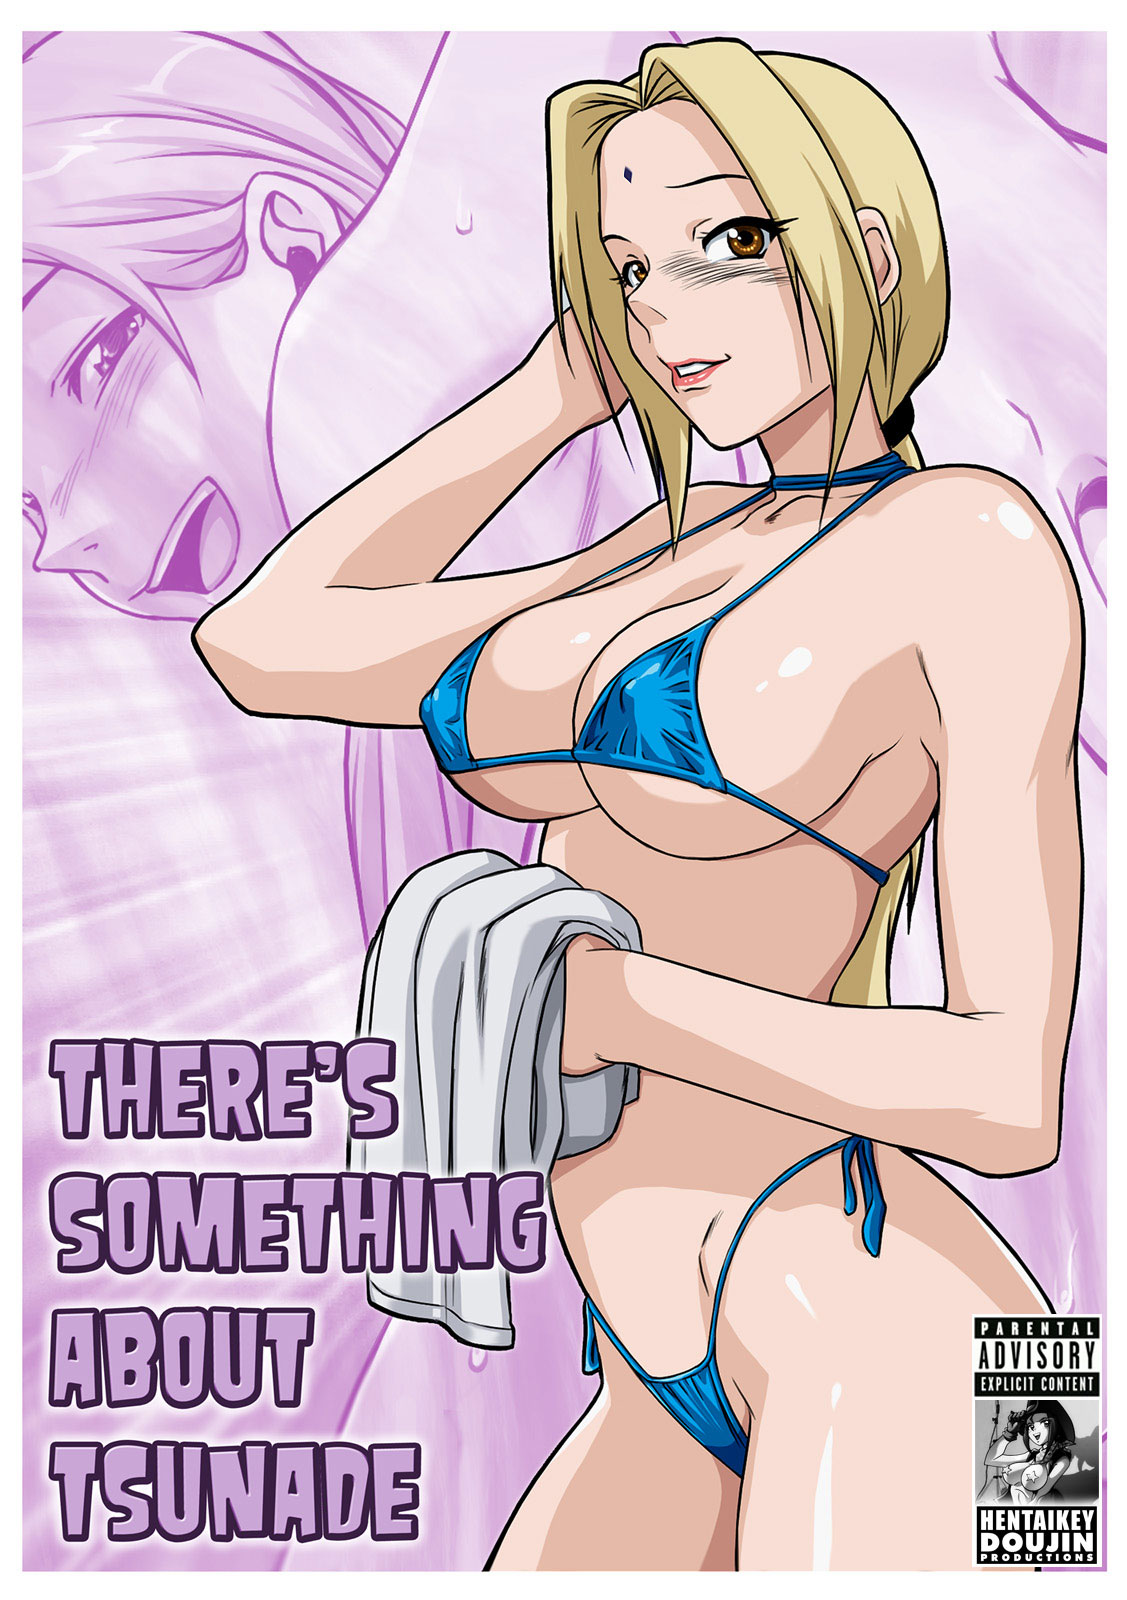 Porn Comics - There’s Something About Tsunade- Melkormancin porn comics 8 muses